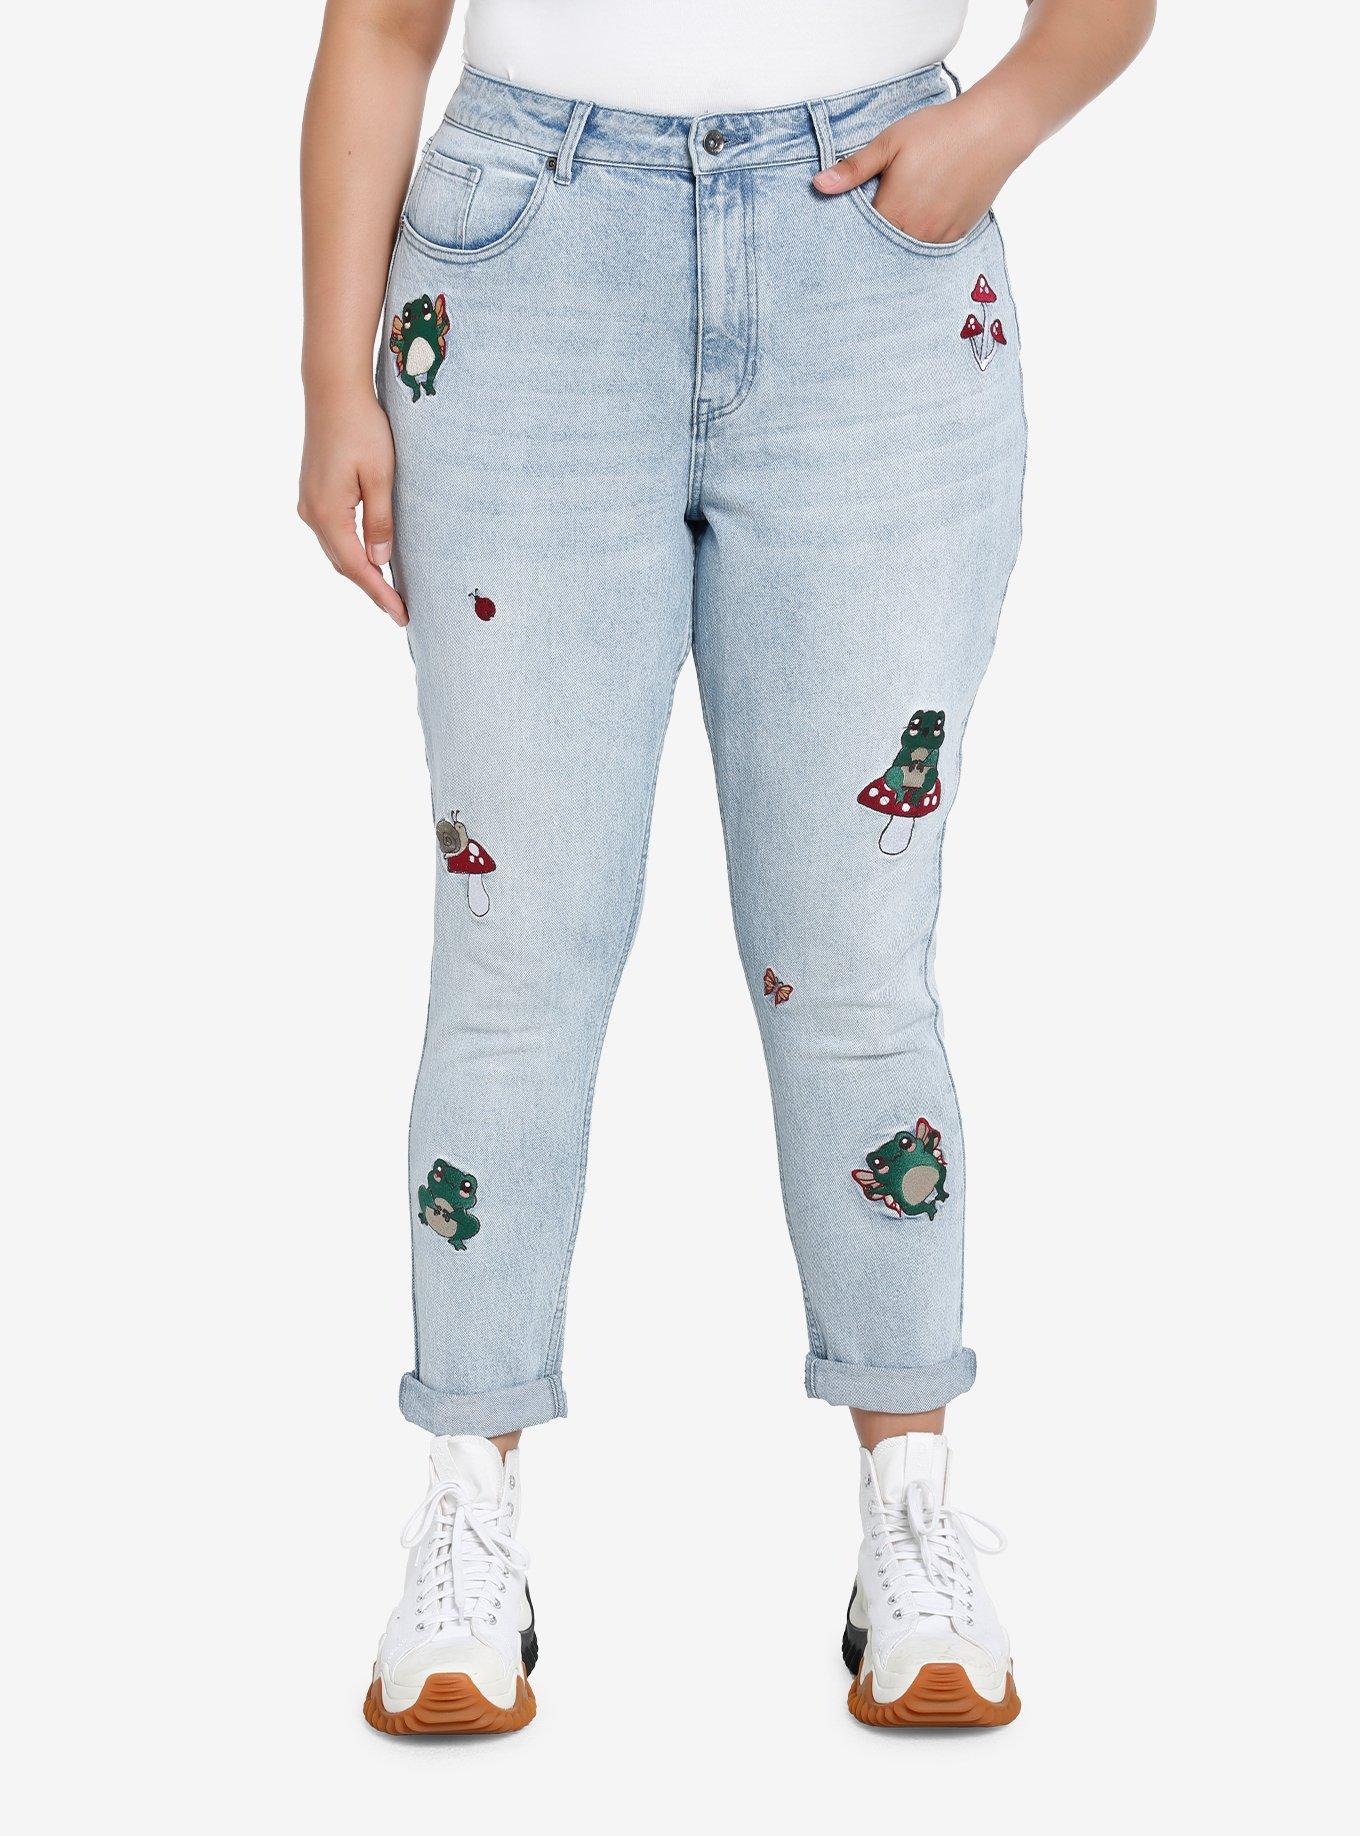 HT Denim Frogs & Mushrooms Embroidered Mom Jeans Plus Size | Hot Topic